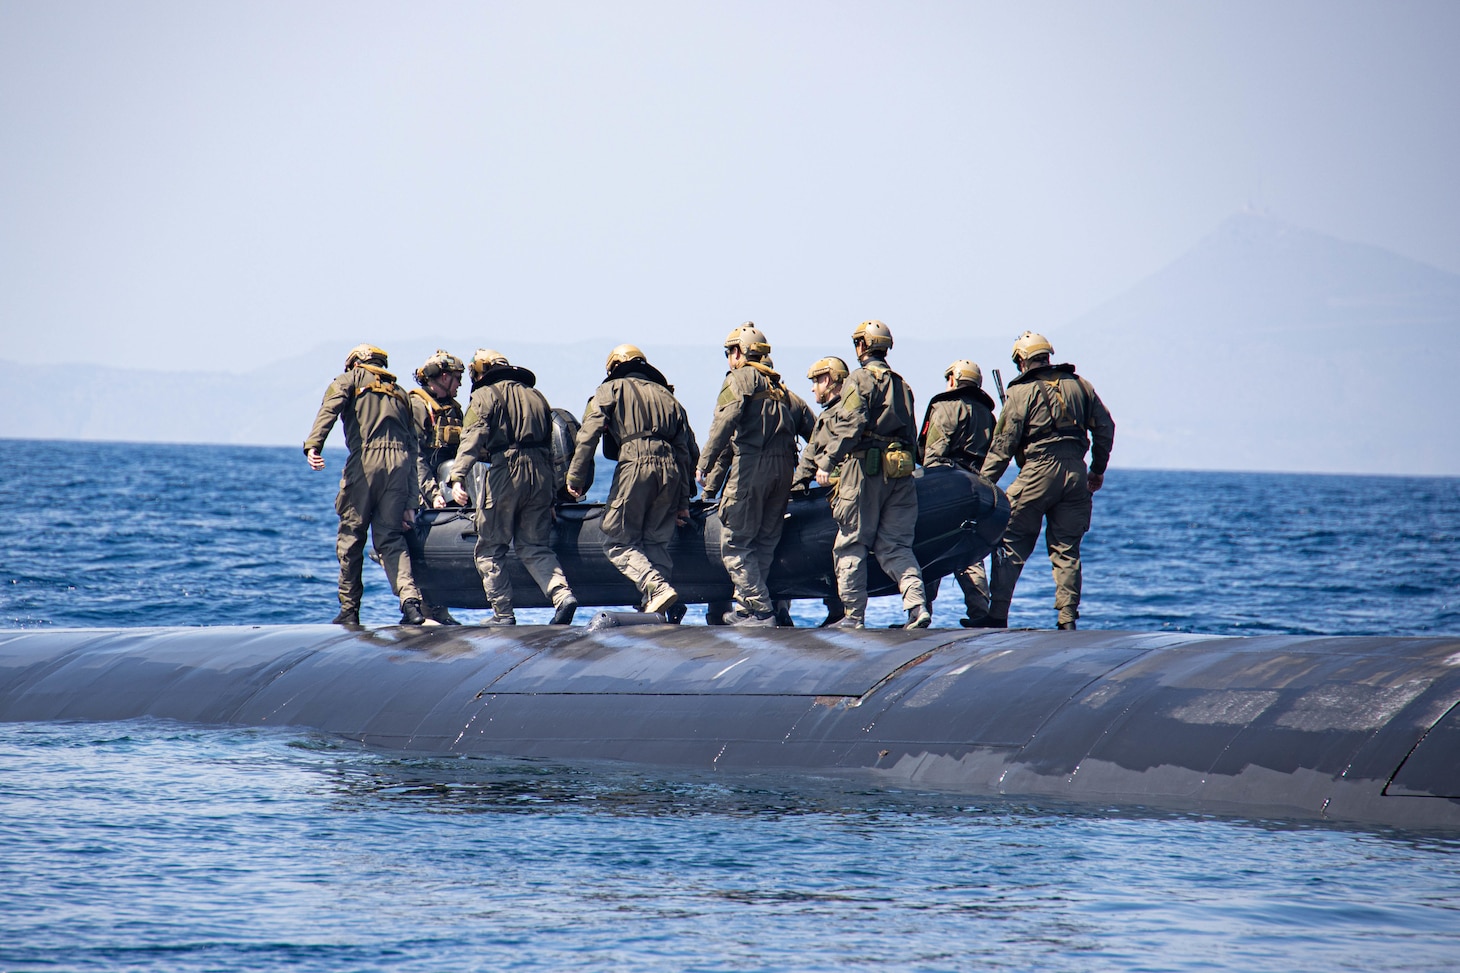 SOUDA BAY (March 27, 2022) – U.S. Marines with Task Force 61/2 (TF-61/2), aboard the Ohio-class guided-missile submarine USS Georgia (SSGN 729), prepare to launch with their combat rubber raiding craft onto the waters near Souda Bay, Greece, March 27, 2022. TF-61/2 will temporarily provide command and control support to the commander of U.S. Sixth Fleet, to synchronize Navy and Marine Corps units and capabilities already in theater, in support of regional Allies and Partners and U.S. national security interests. (U.S. Marine Corps photo by Sgt Dylan Chagnon/Released)